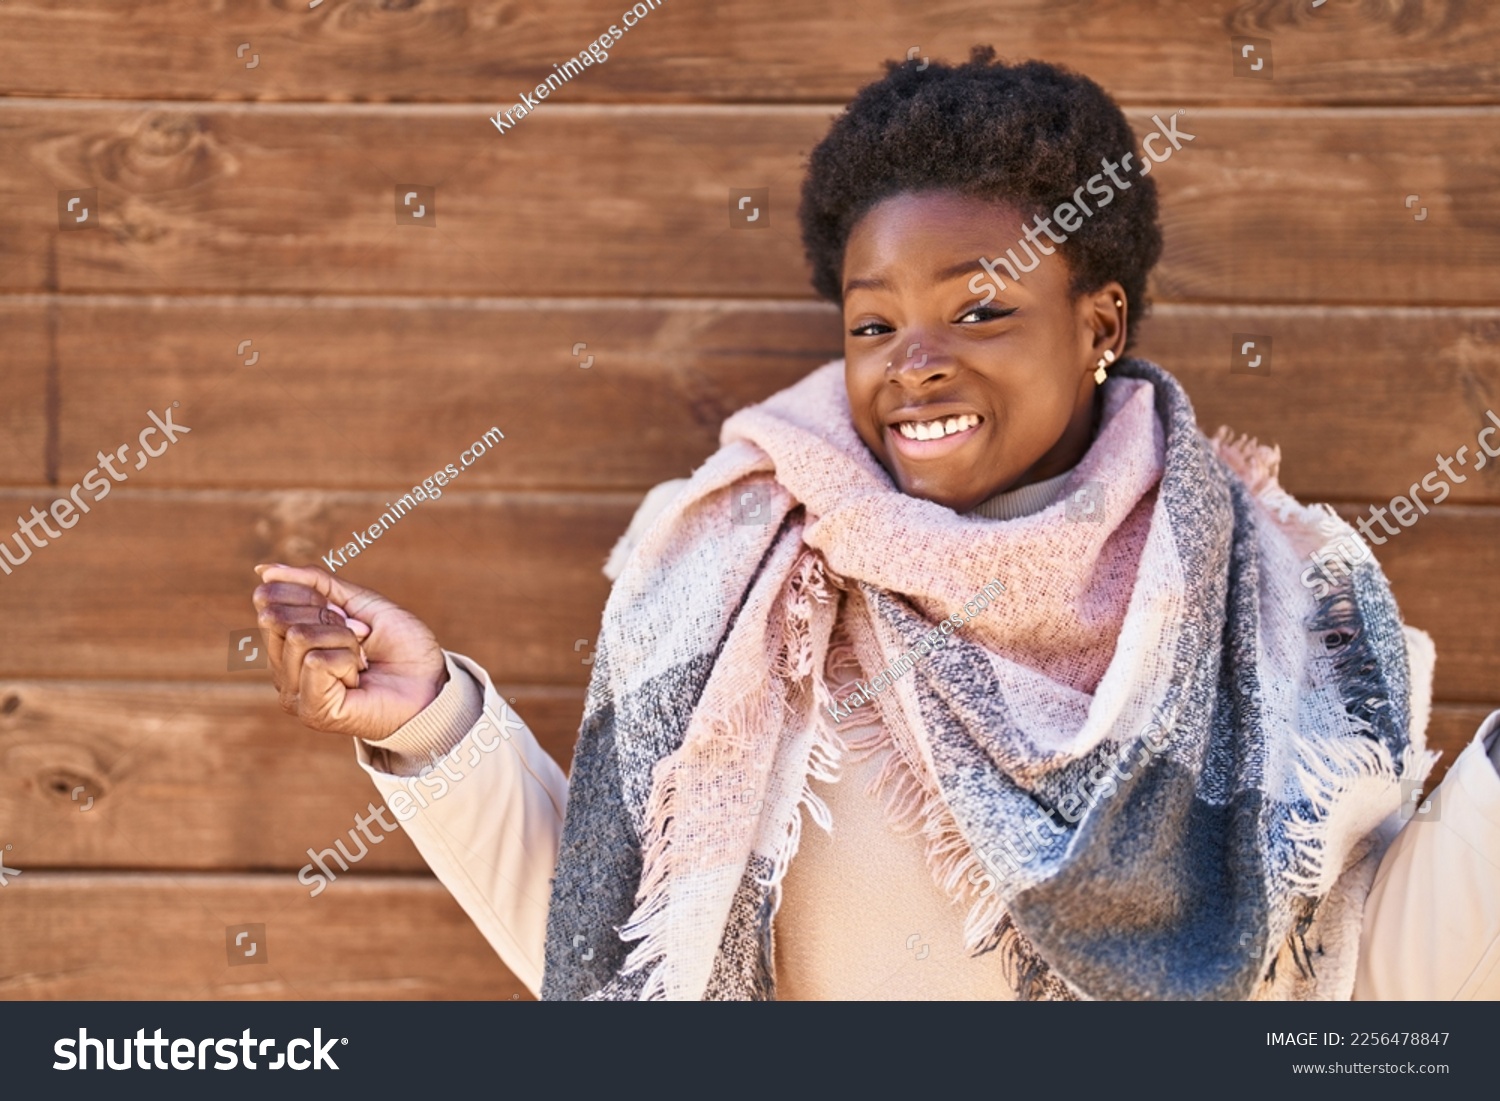 African american woman standing over wood background screaming proud, celebrating victory and success very excited with raised arm  #2256478847